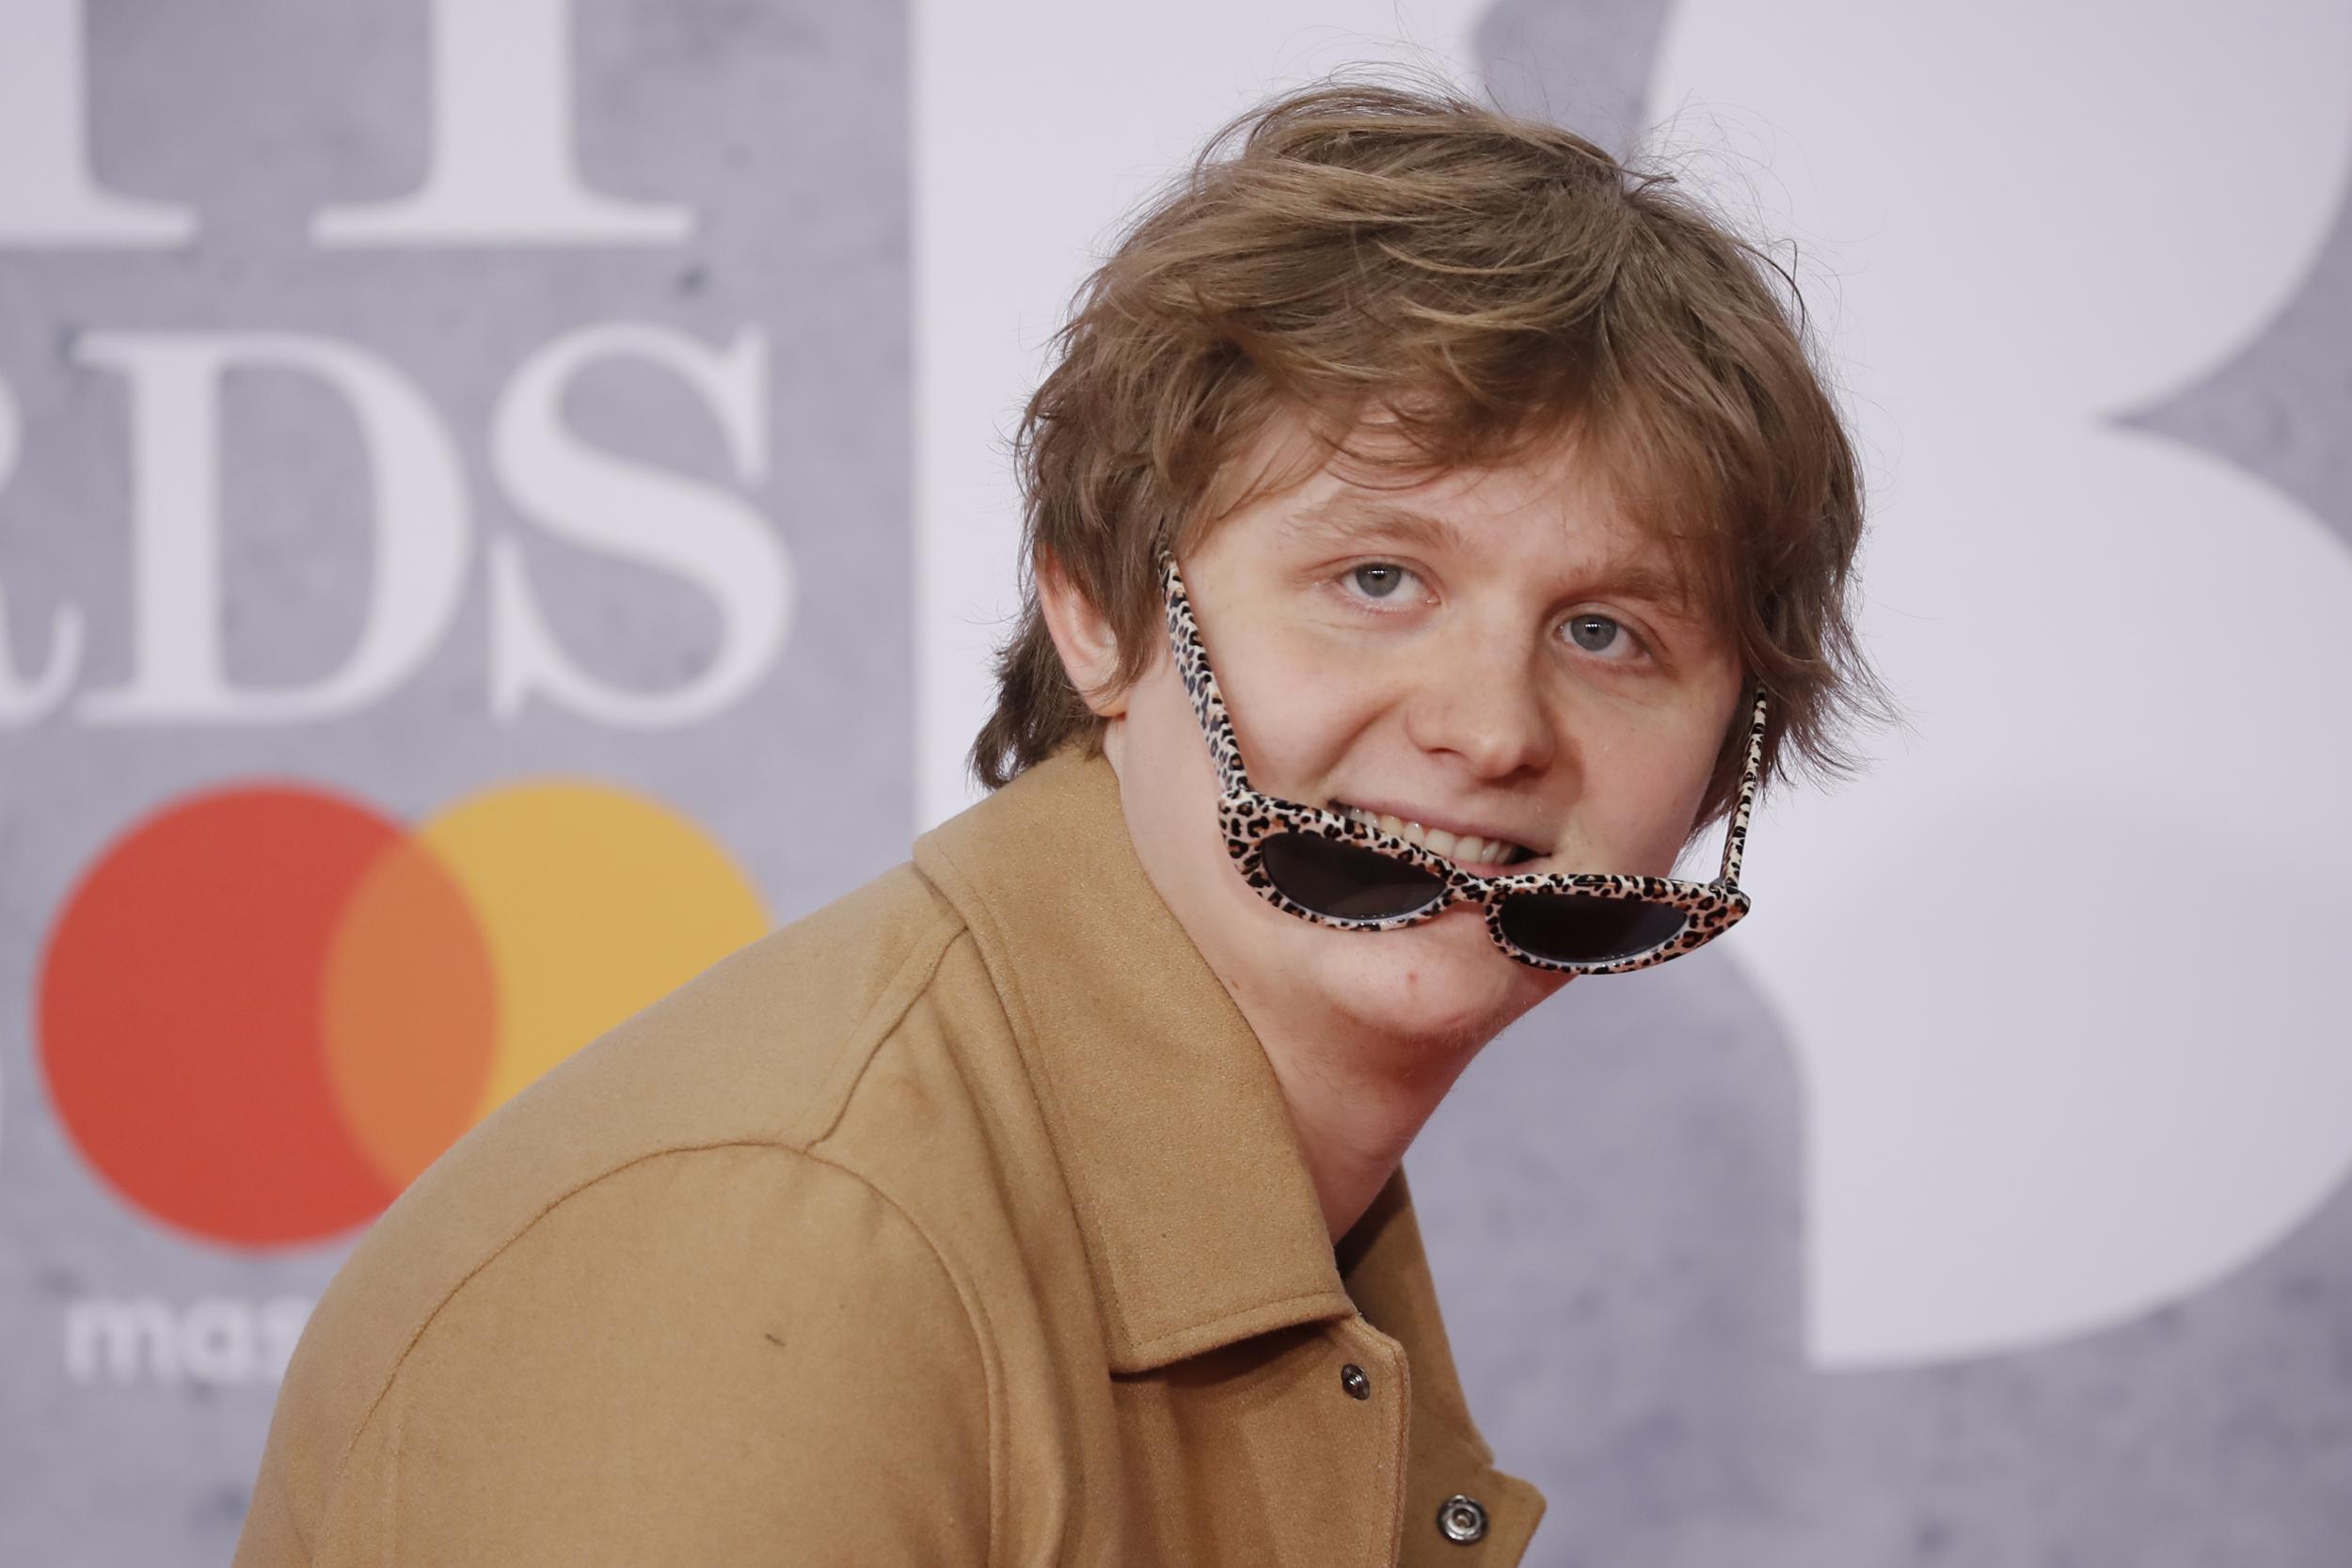 Lewis Capaldi posts hilarious video over fears he'll become a 'one